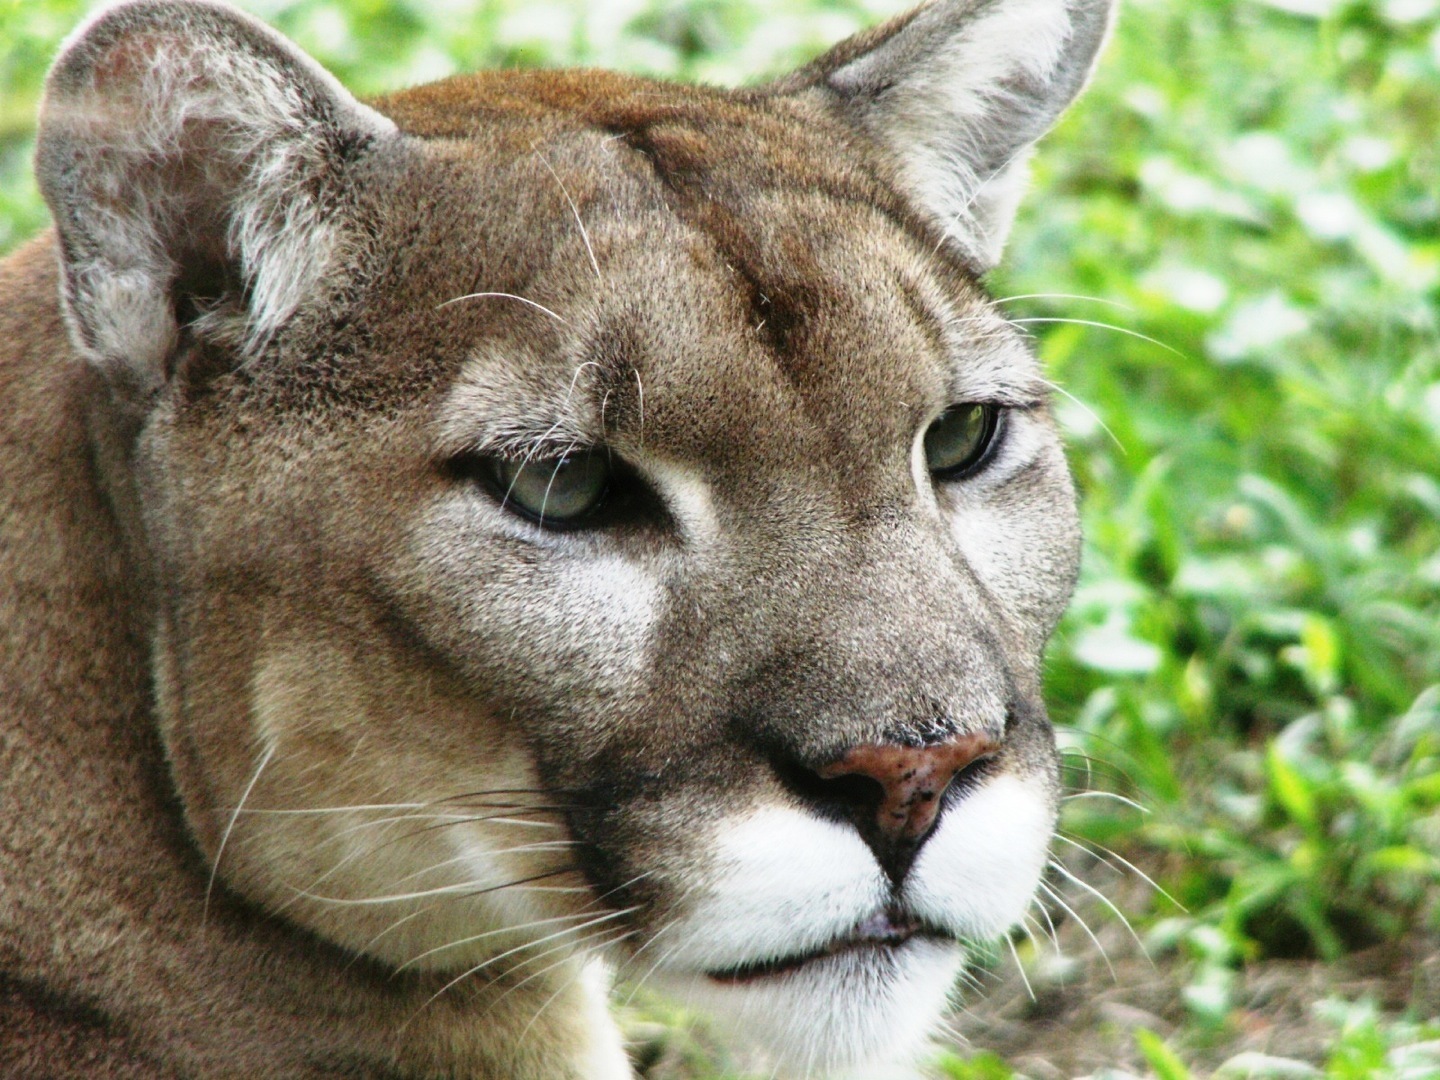 Animals of the world: Florida Panther